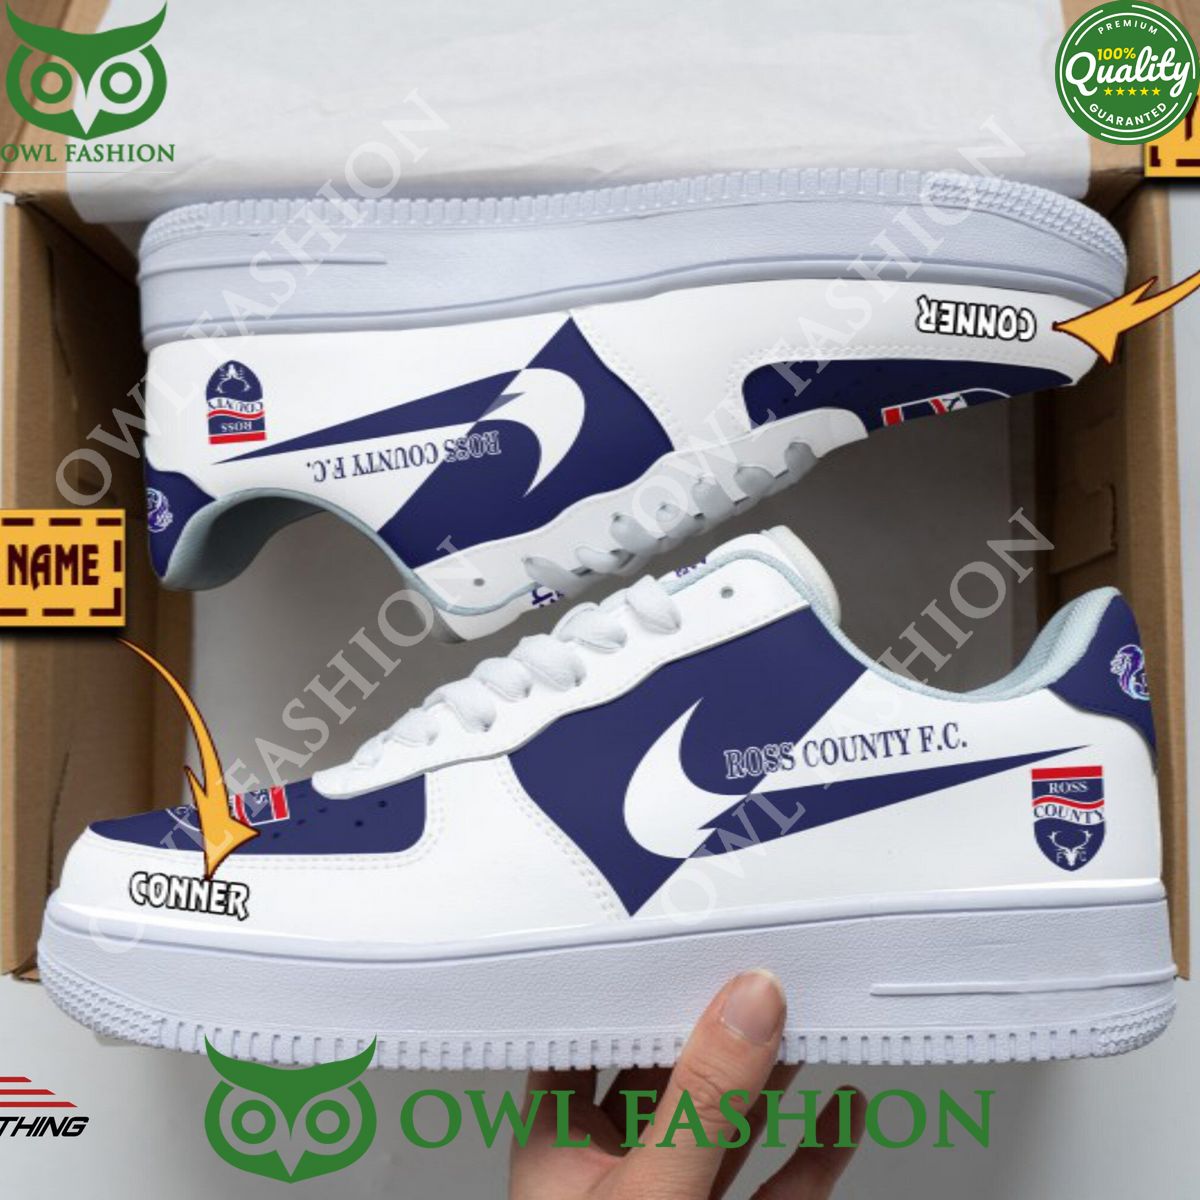 spfl ross county f c air force 1 naf shoes 1 WI61z.jpg